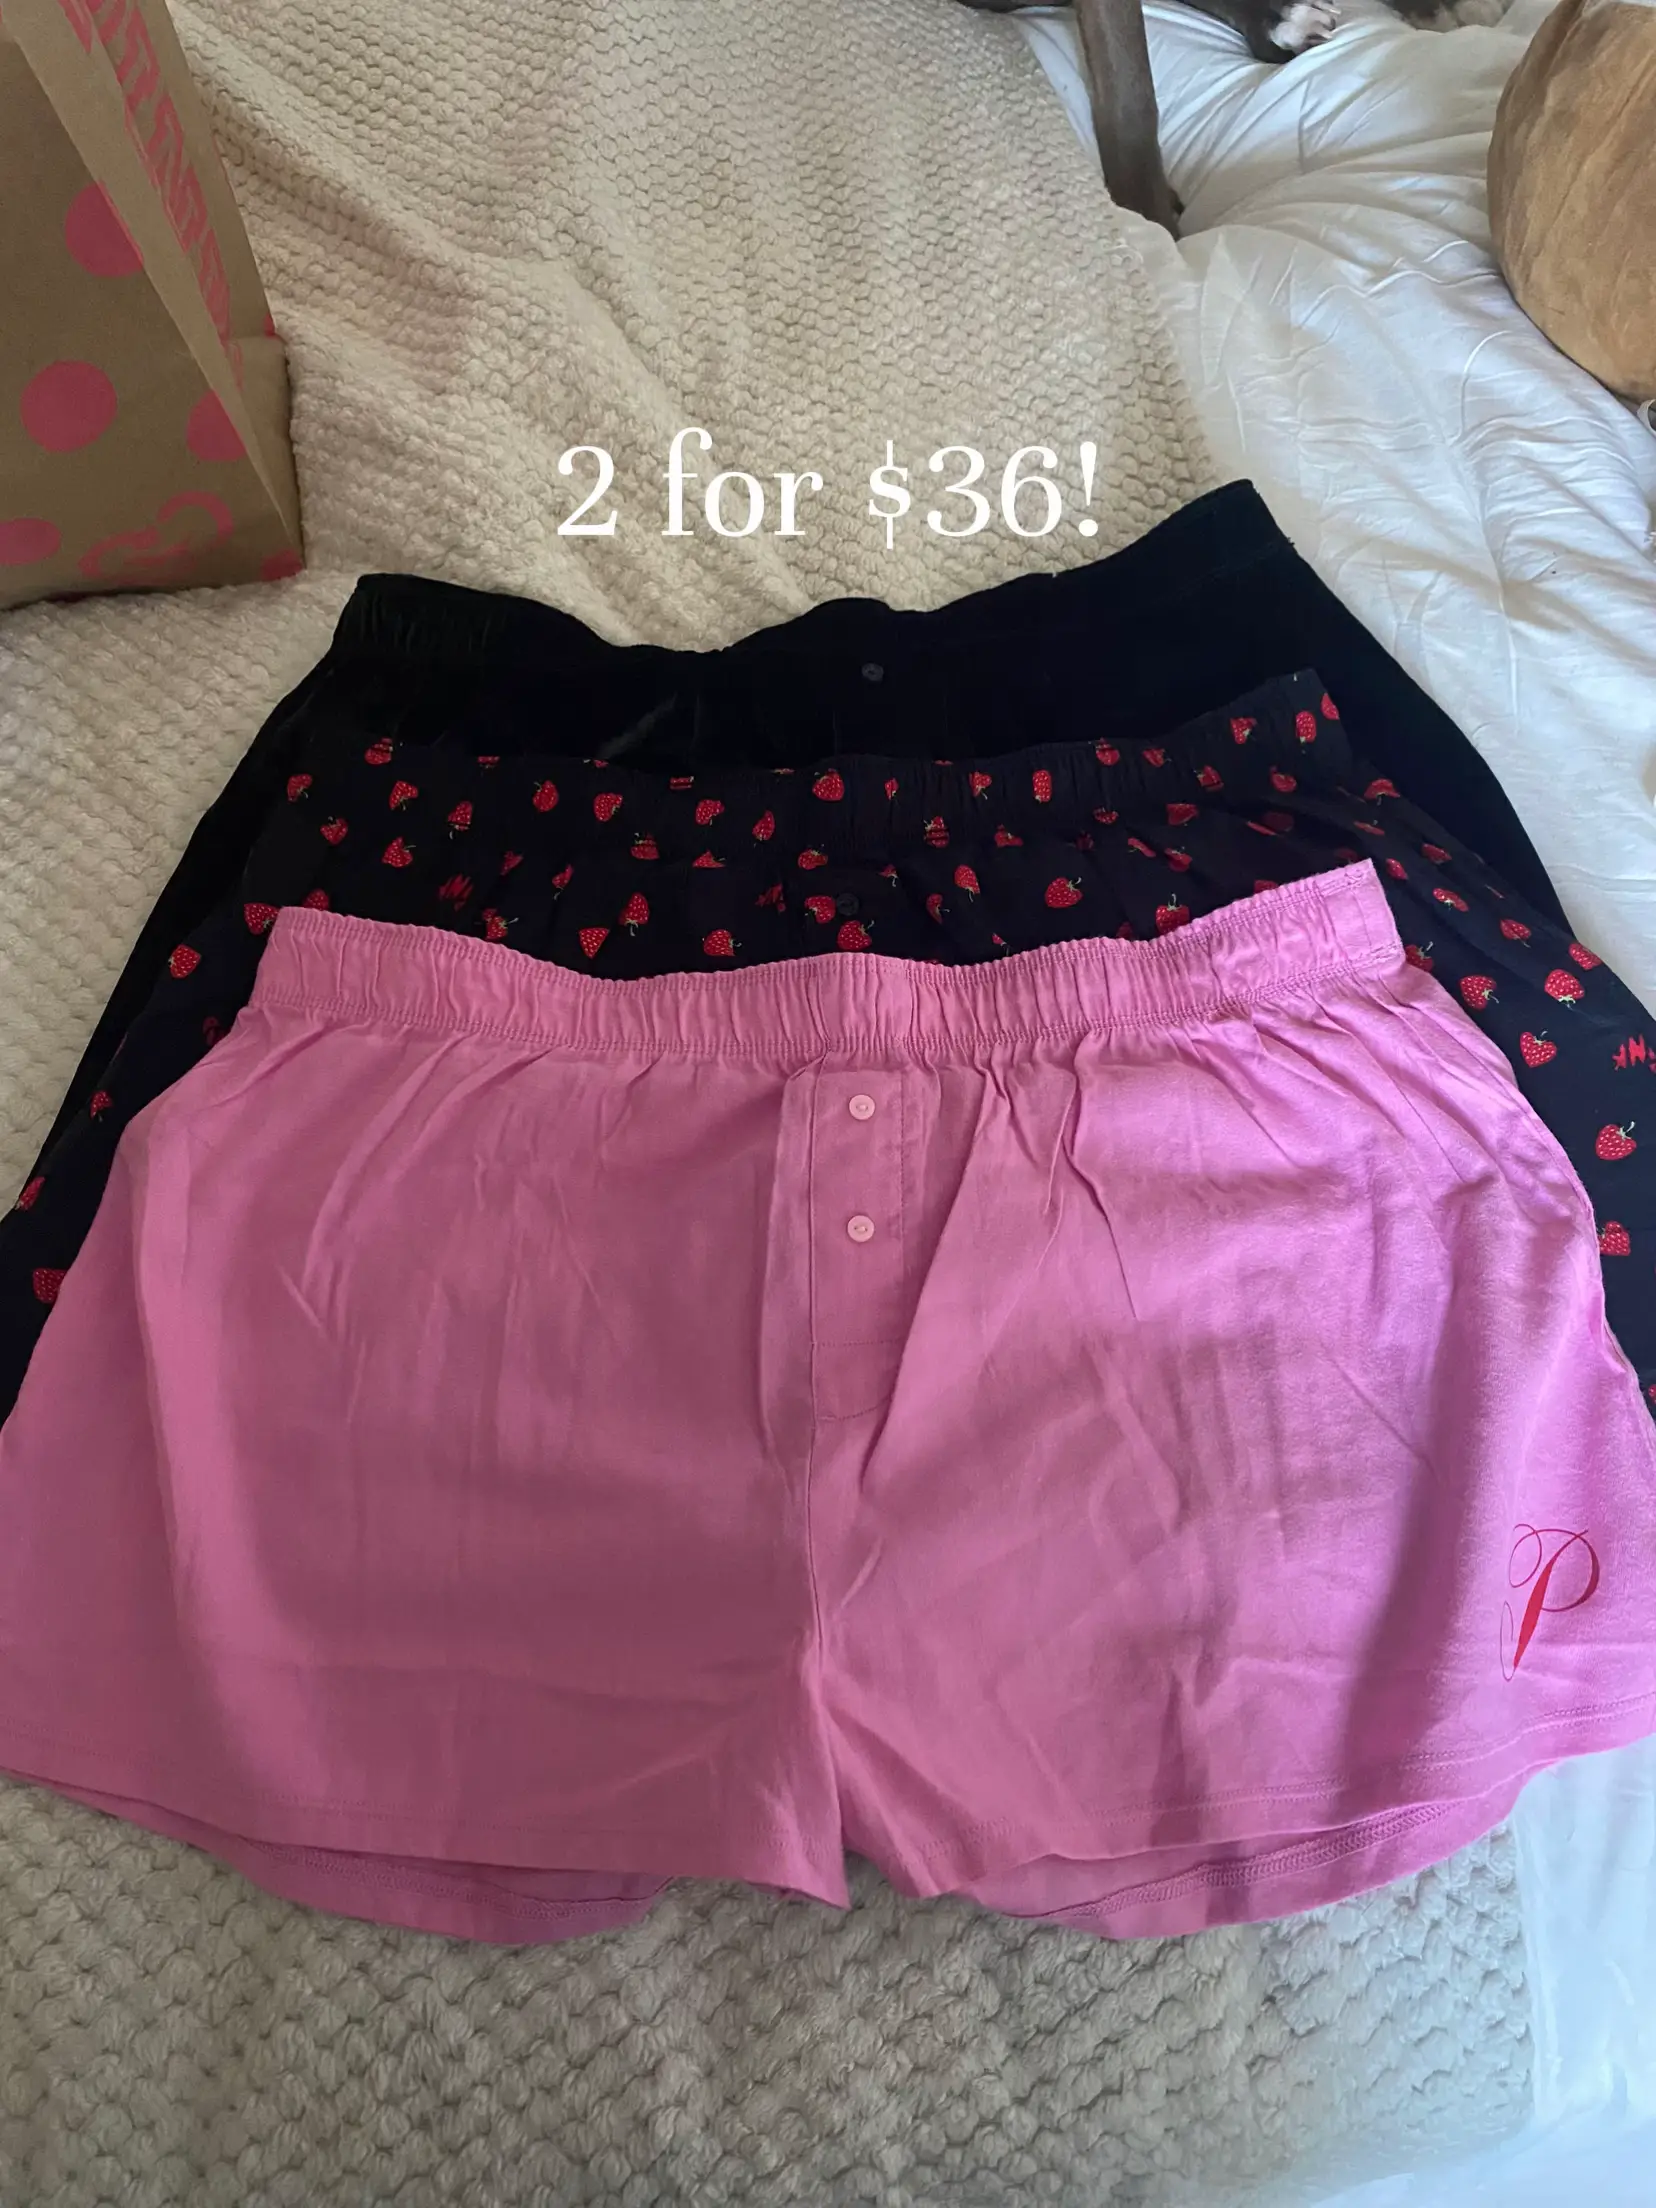 Victoria's Secret PINK $15 Sports Bras and $25 Leggings - The Freebie Guy:  Freebies, Penny Shopping, Deals, & Giveaways